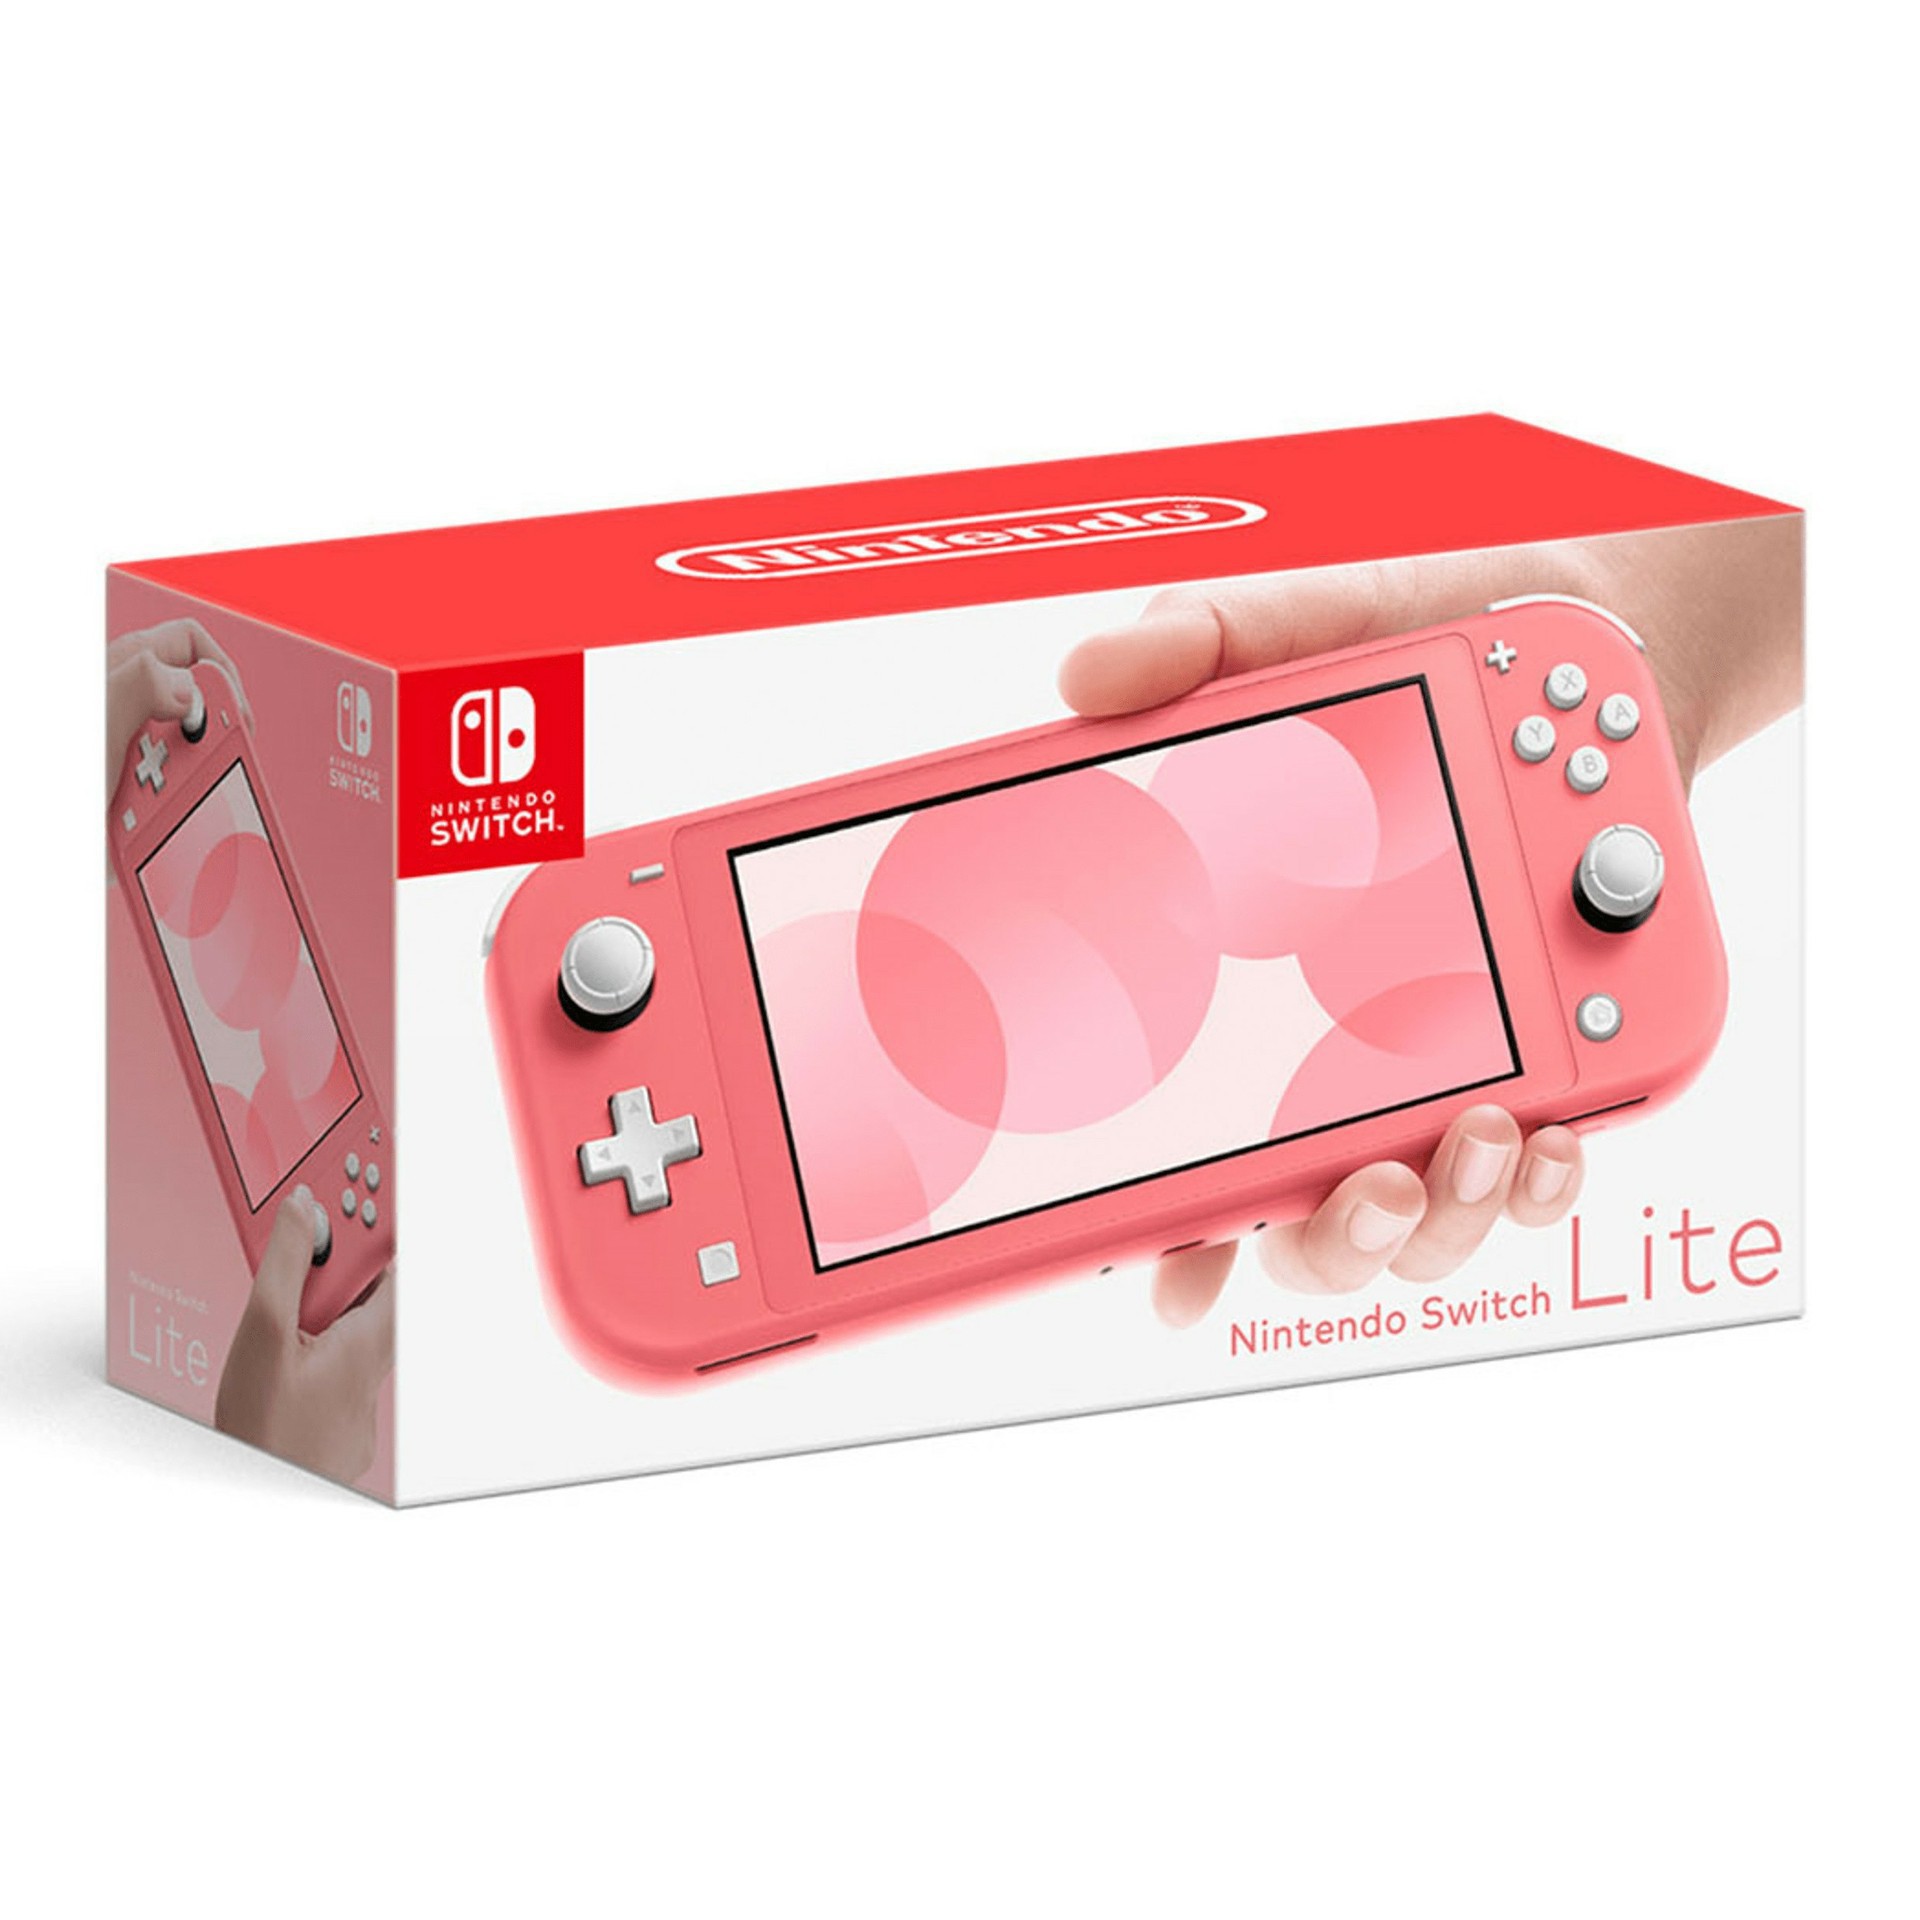 Nintendo Switch Lite Console - Coral [Complete] Kopen | Nintendo Switch Hardware